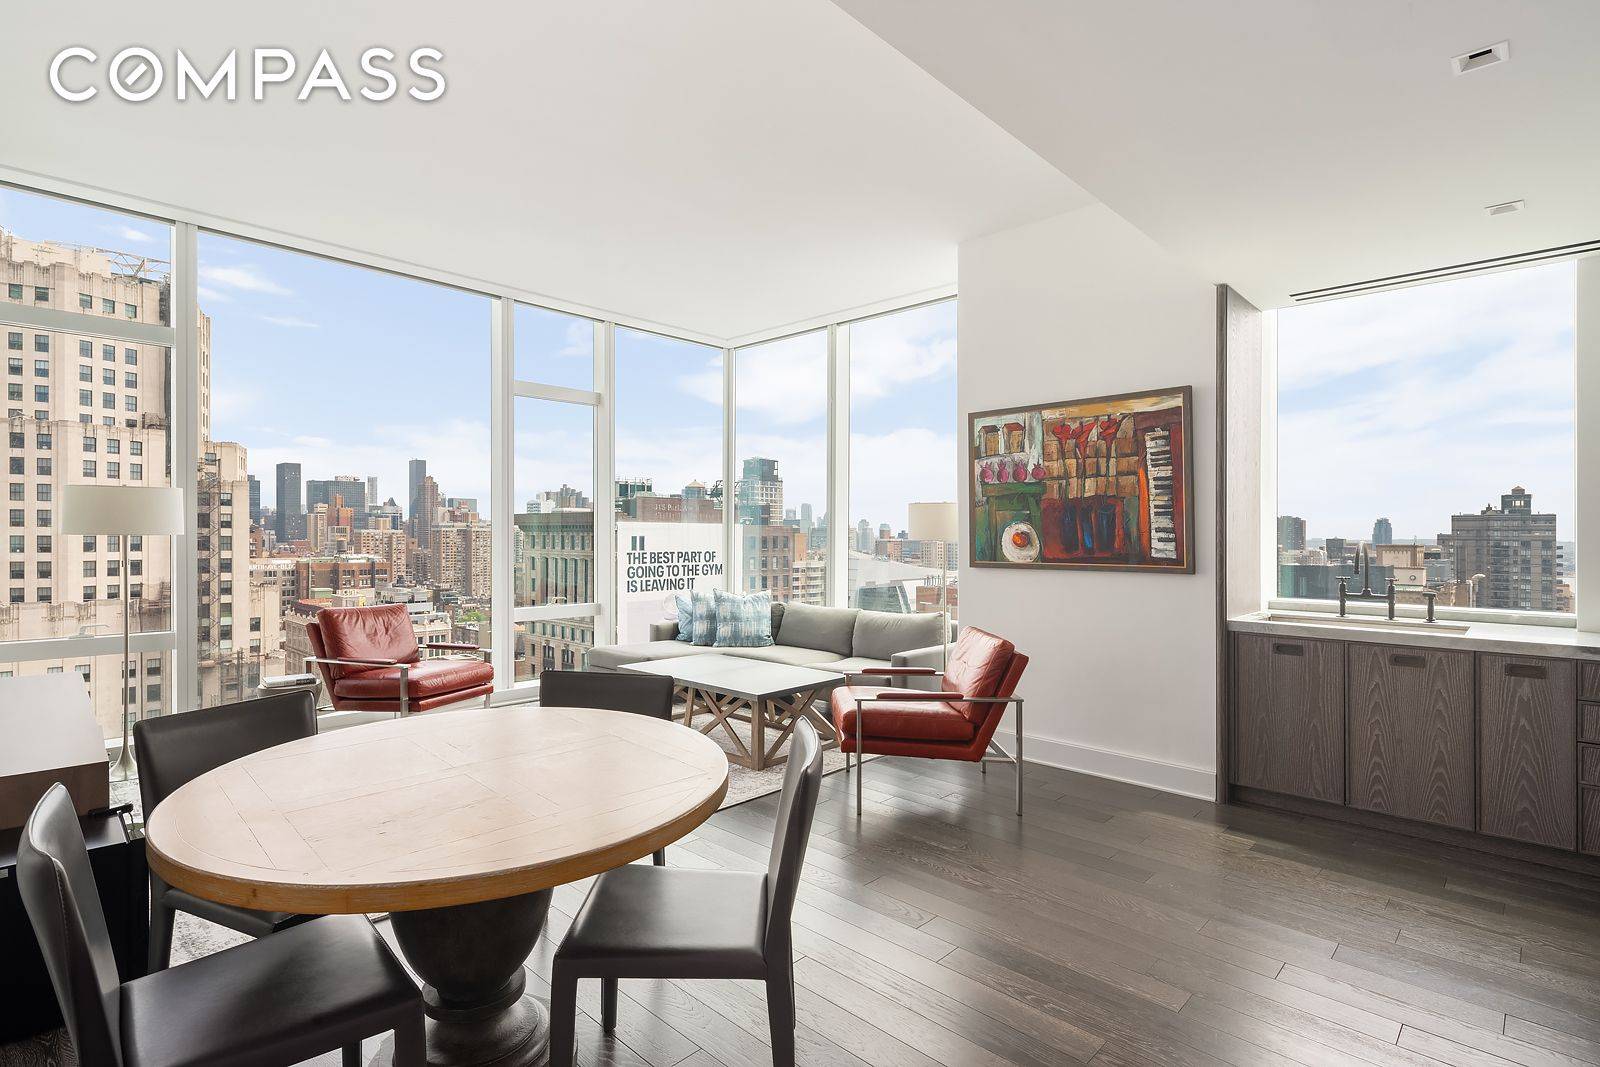 This fully furnished, 1, 491 square foot, 2 bedroom, 2 bath apartment features floor to ceiling windows with northern, southern and eastern views of the City including Madison Square Park, ...